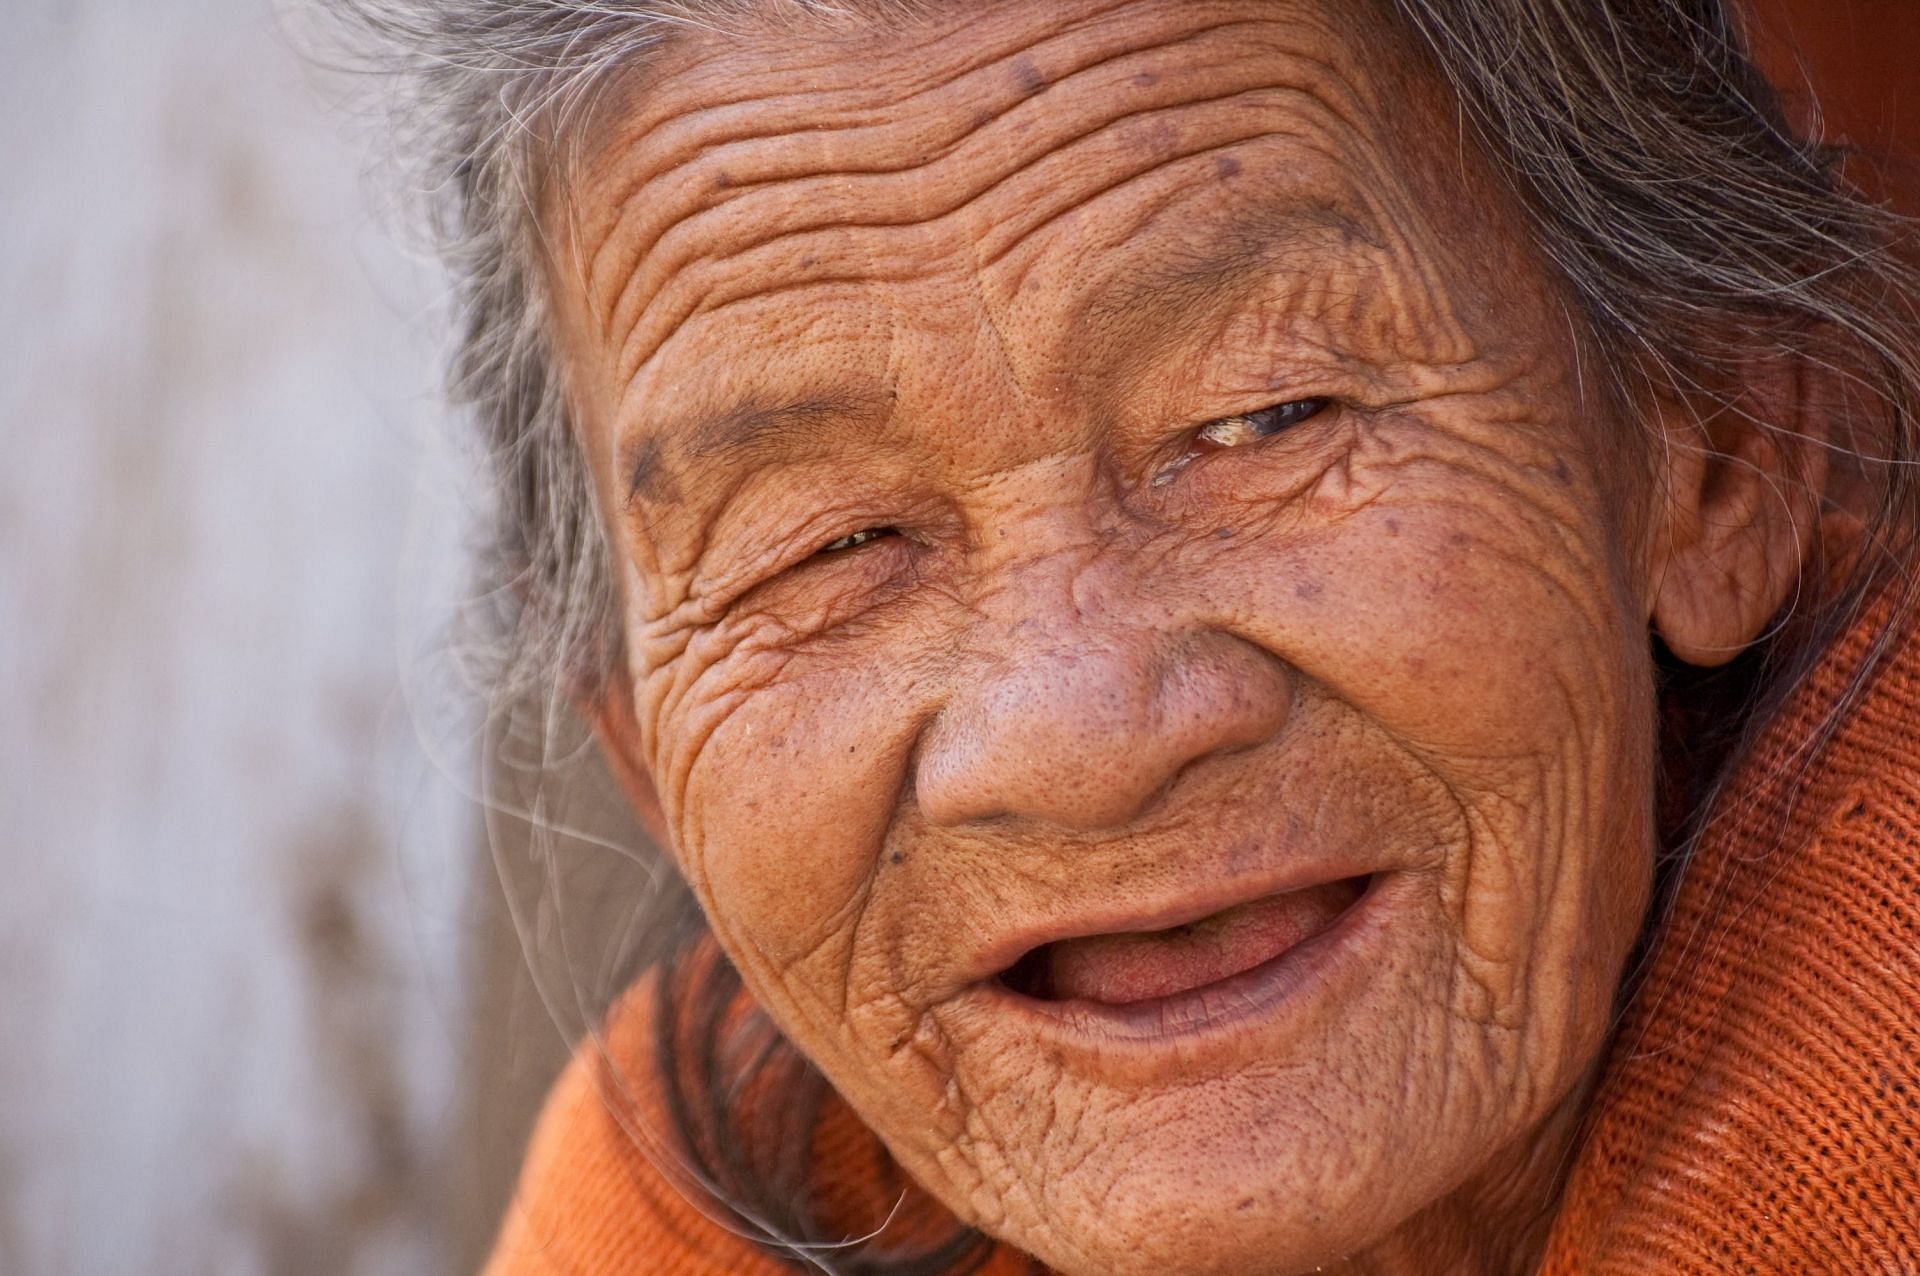 Importance of reducing wrinkles (image sourced via Pexels / Photo by pixabay)